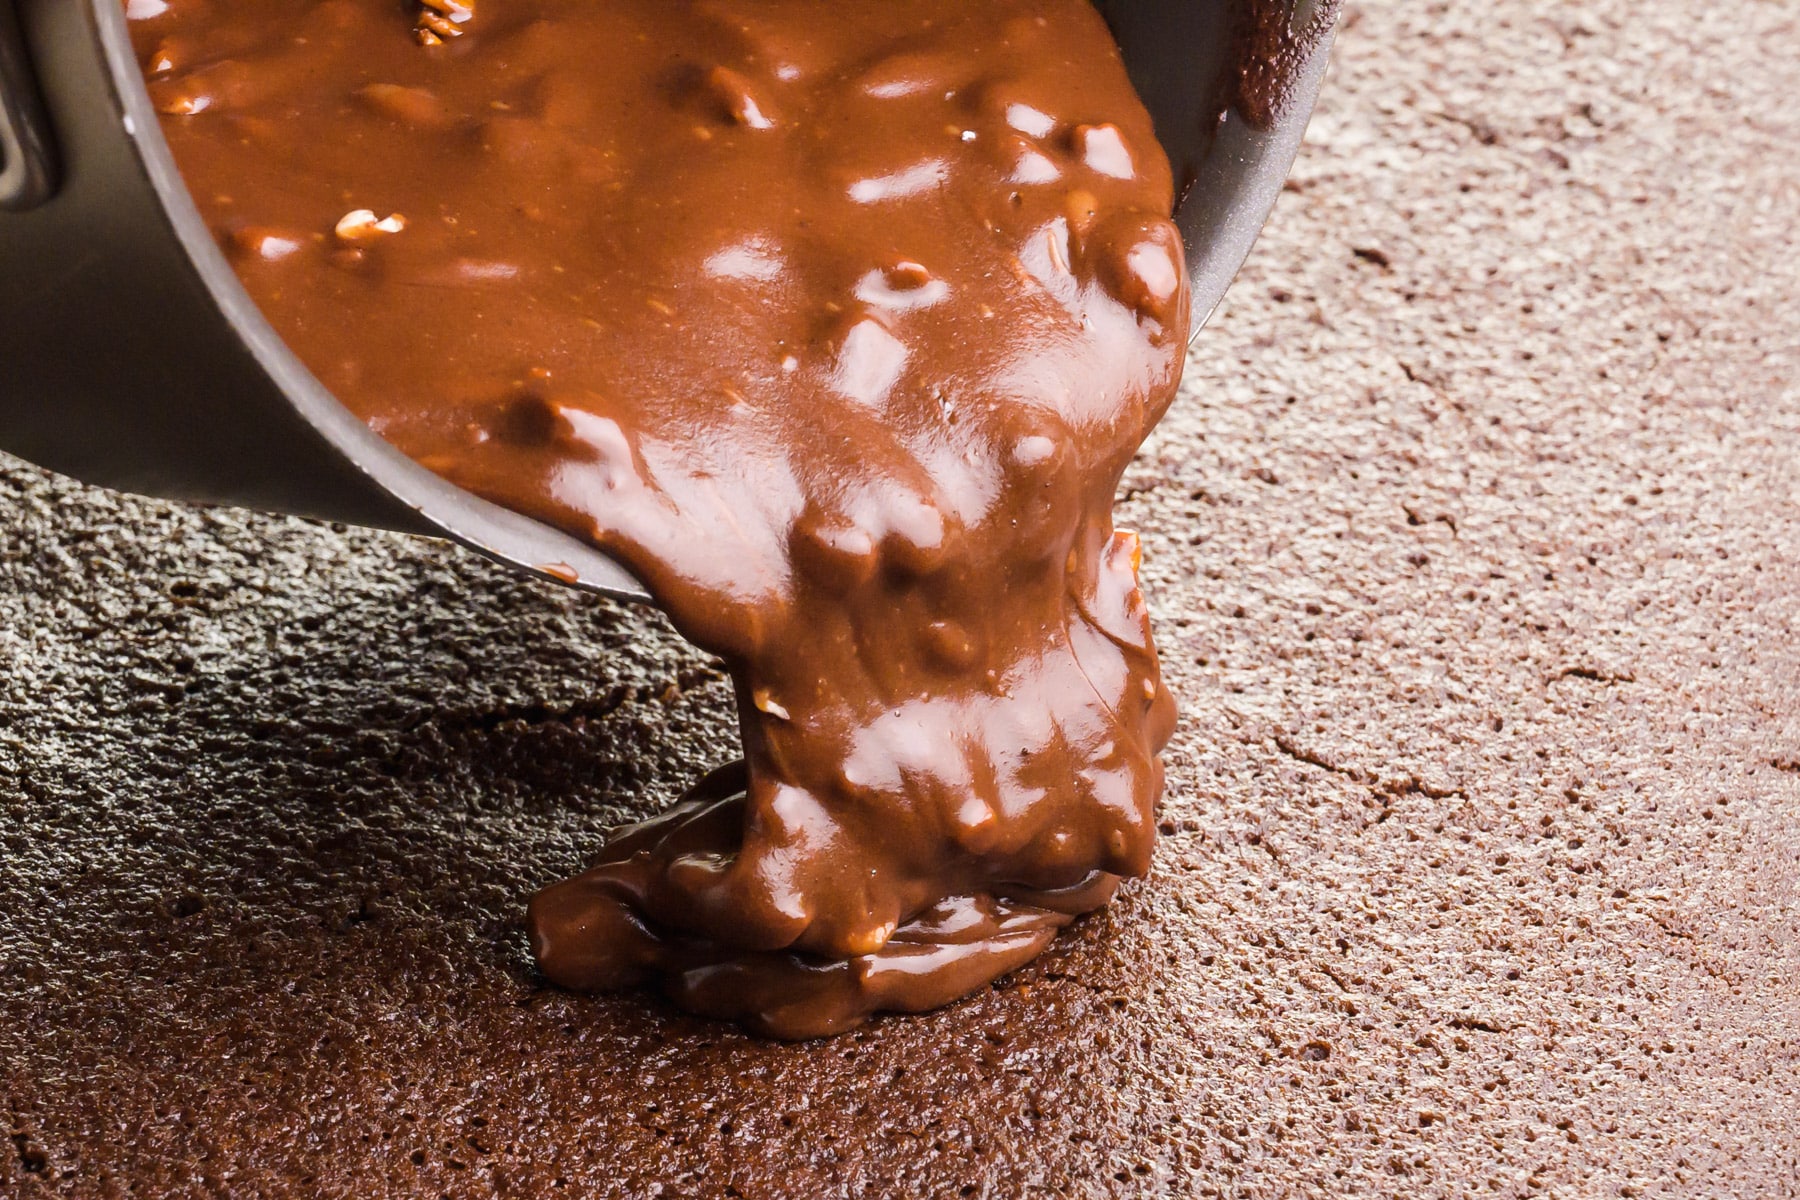 Chocolate frosting being poured over a freshly baked chocolate cake.